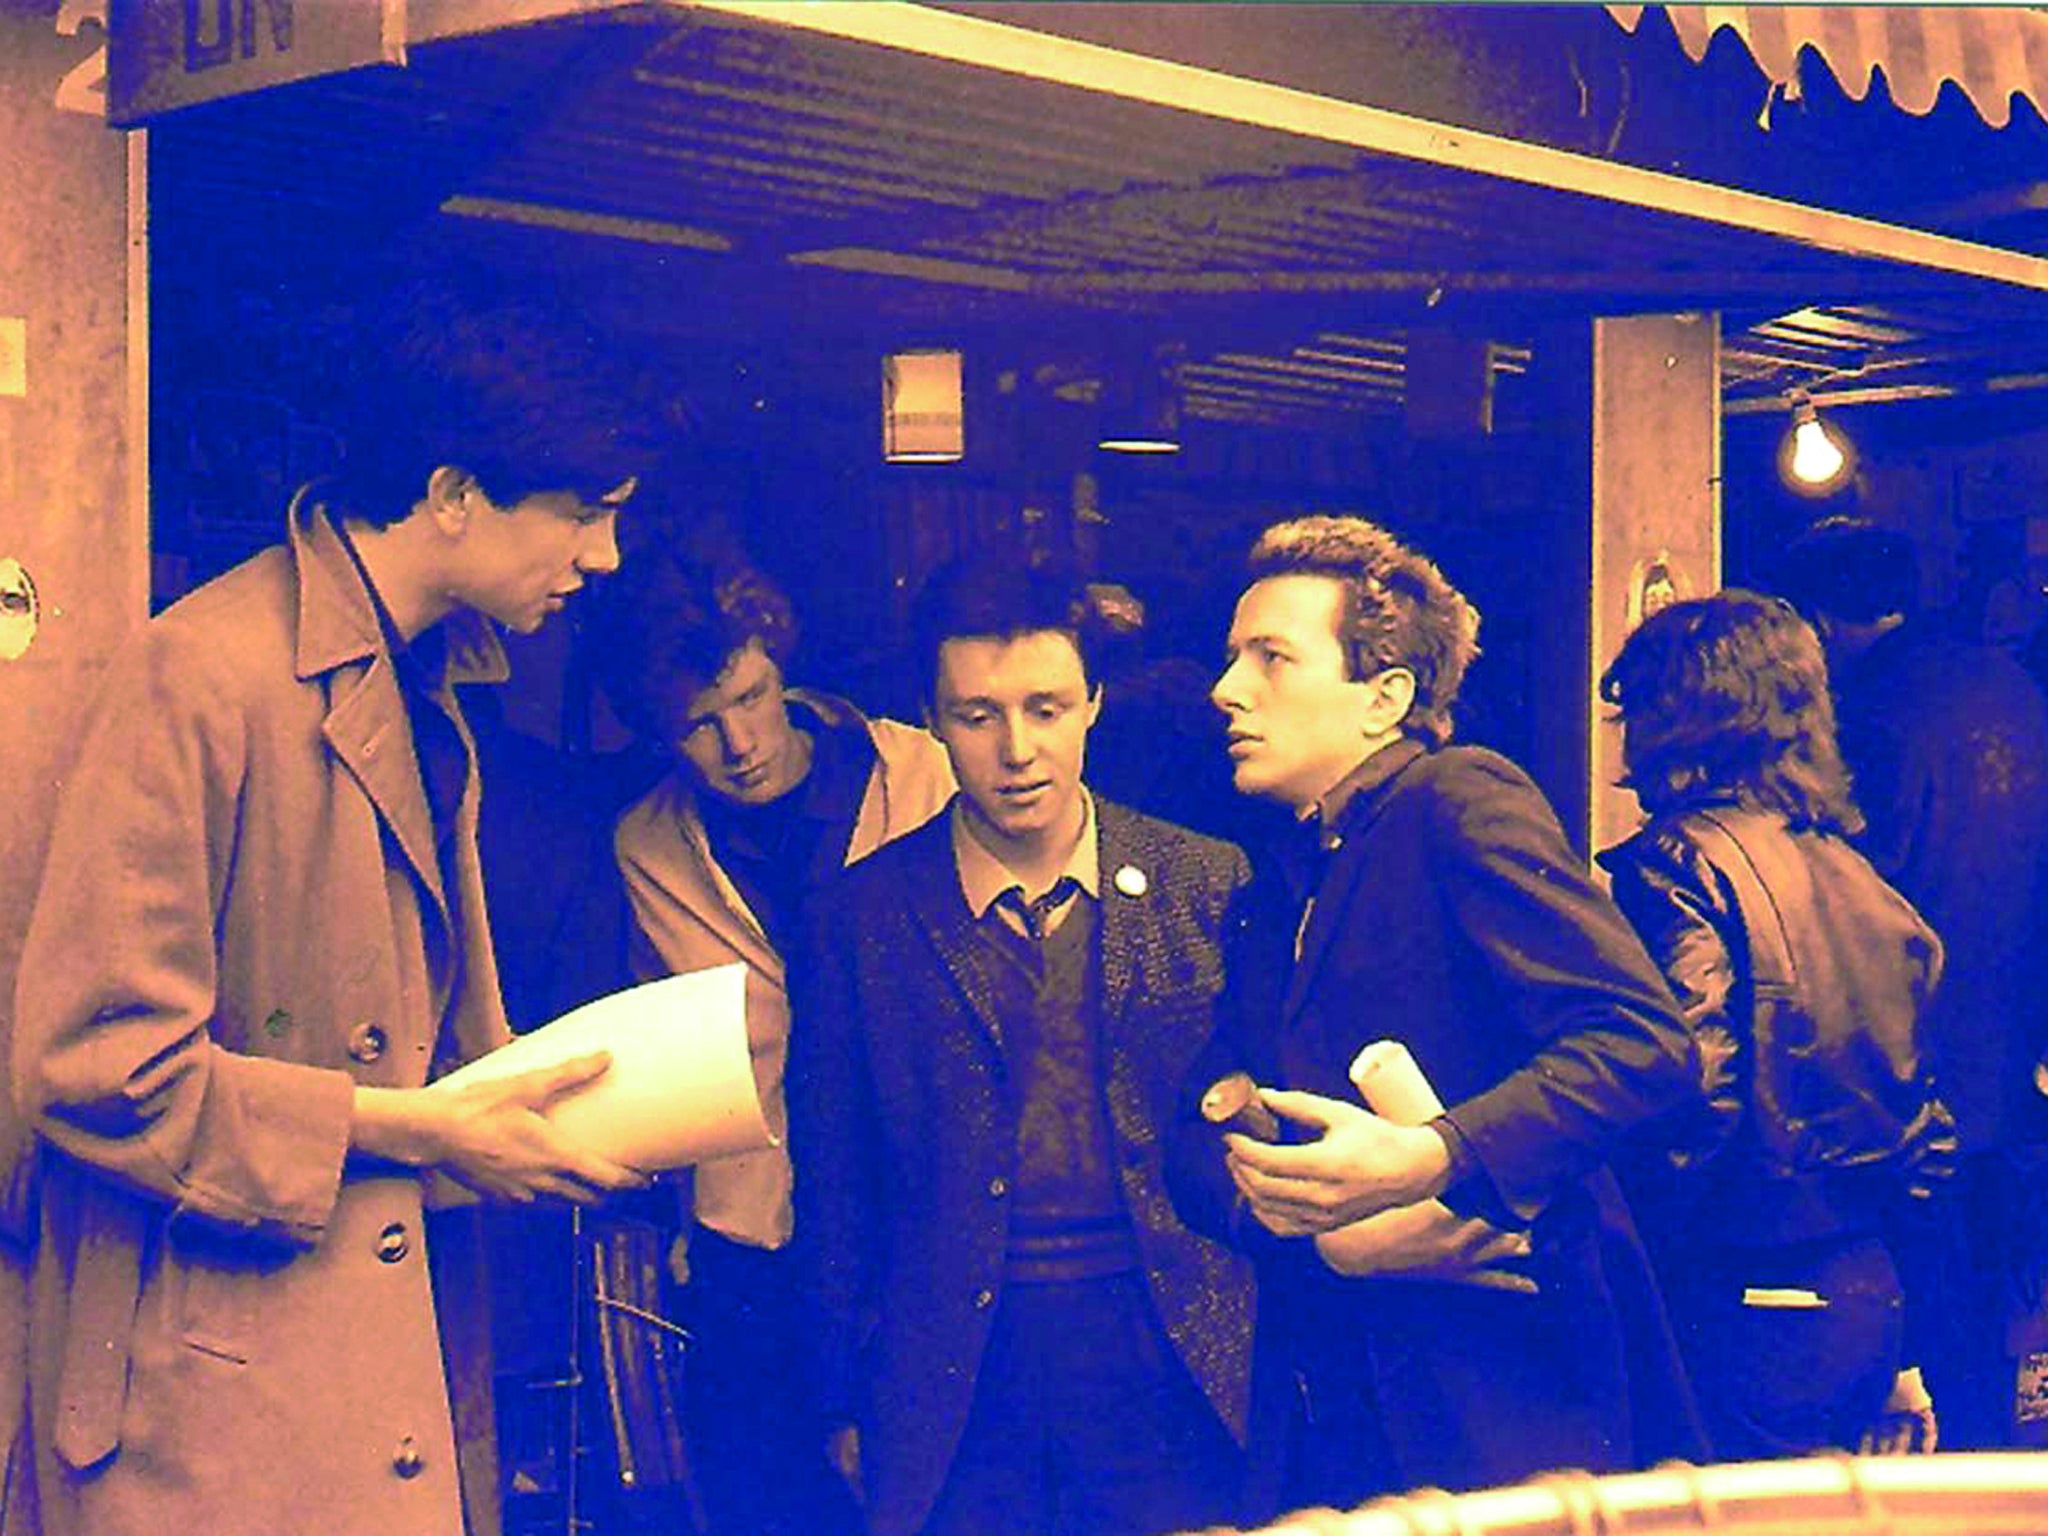 The Rock On stall at Soho market with Joe Strummer, Adrian Thrills and members of the Pop Group, early 1979